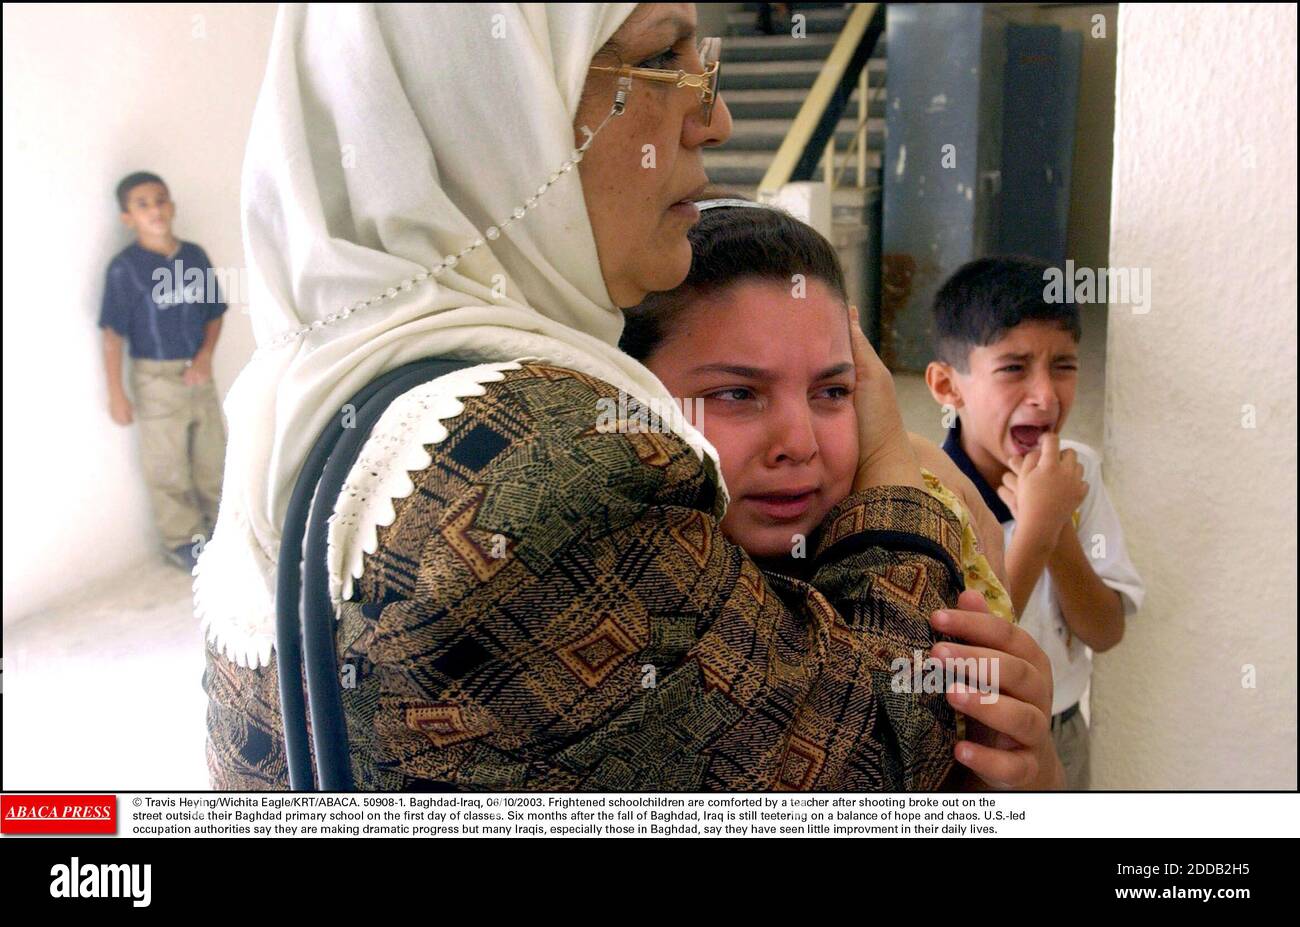 NO FILM, NO VIDEO, NO TV, NO DOCUMENTARY - © Travis Heying/Wichita Eagle/KRT/ABACA. 50908-1. Baghdad-Iraq, 06/10/2003. Frightened schoolchildren are comforted by a teacher after shooting broke out on the street outside their Baghdad primary school on the first day of classes. Six months after the Stock Photo